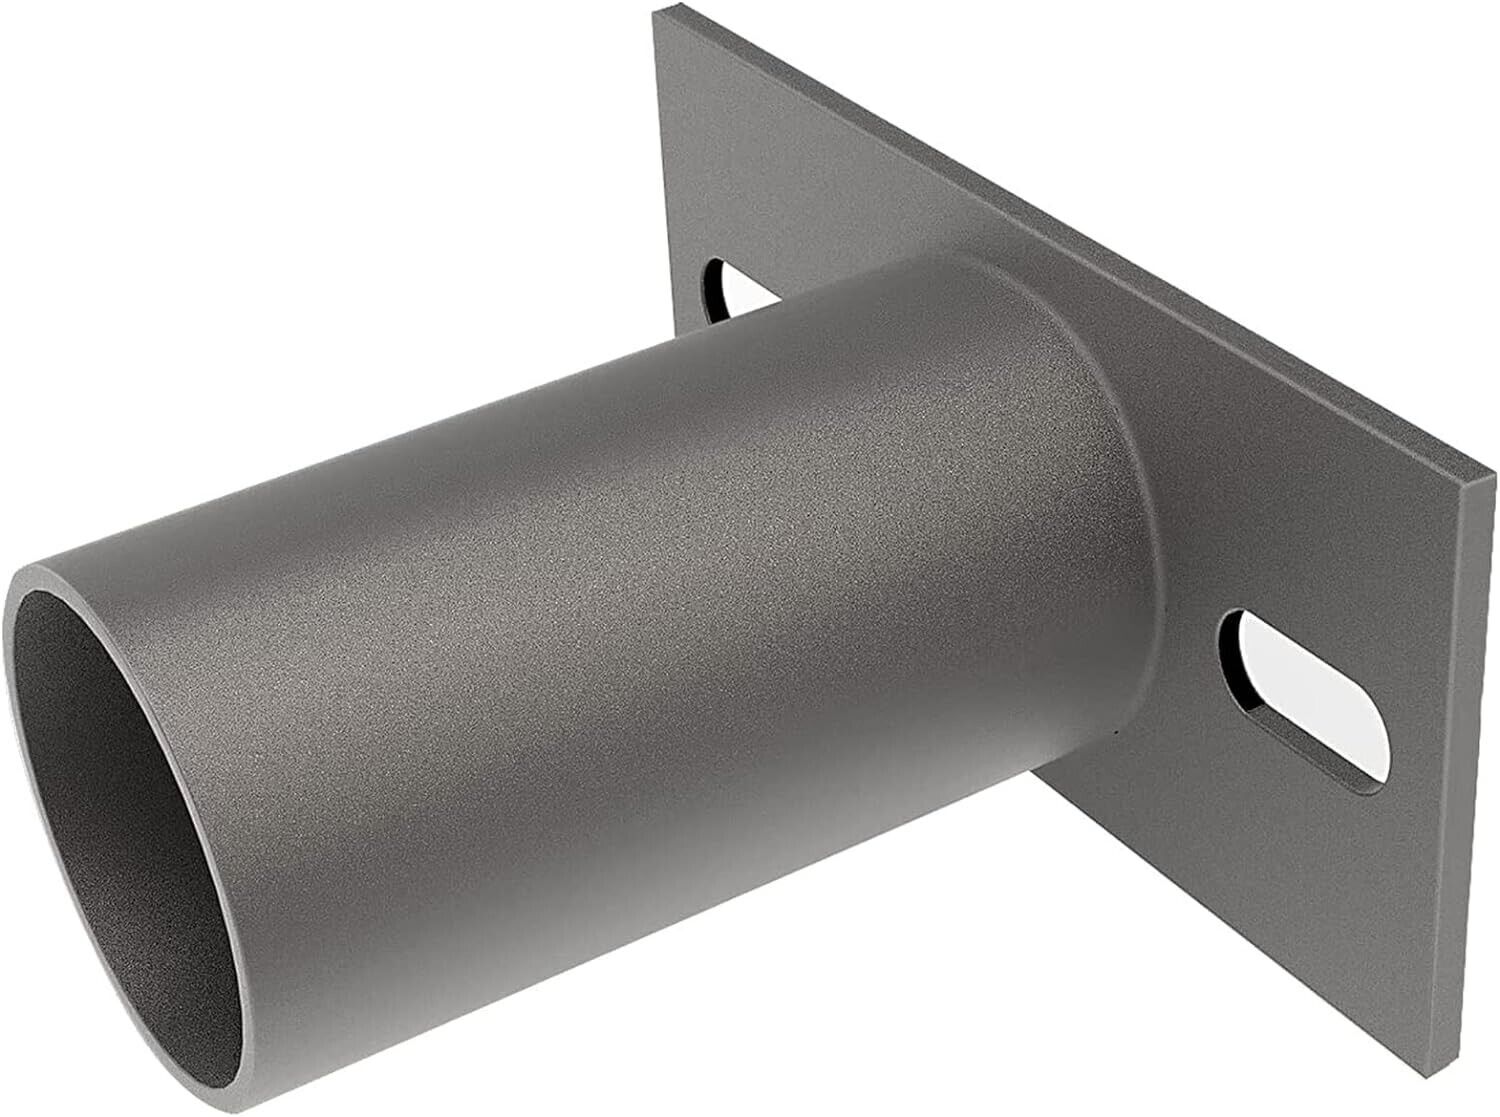 Slip Fitter Adaptor: Light Fixture Accessory for Secure Install